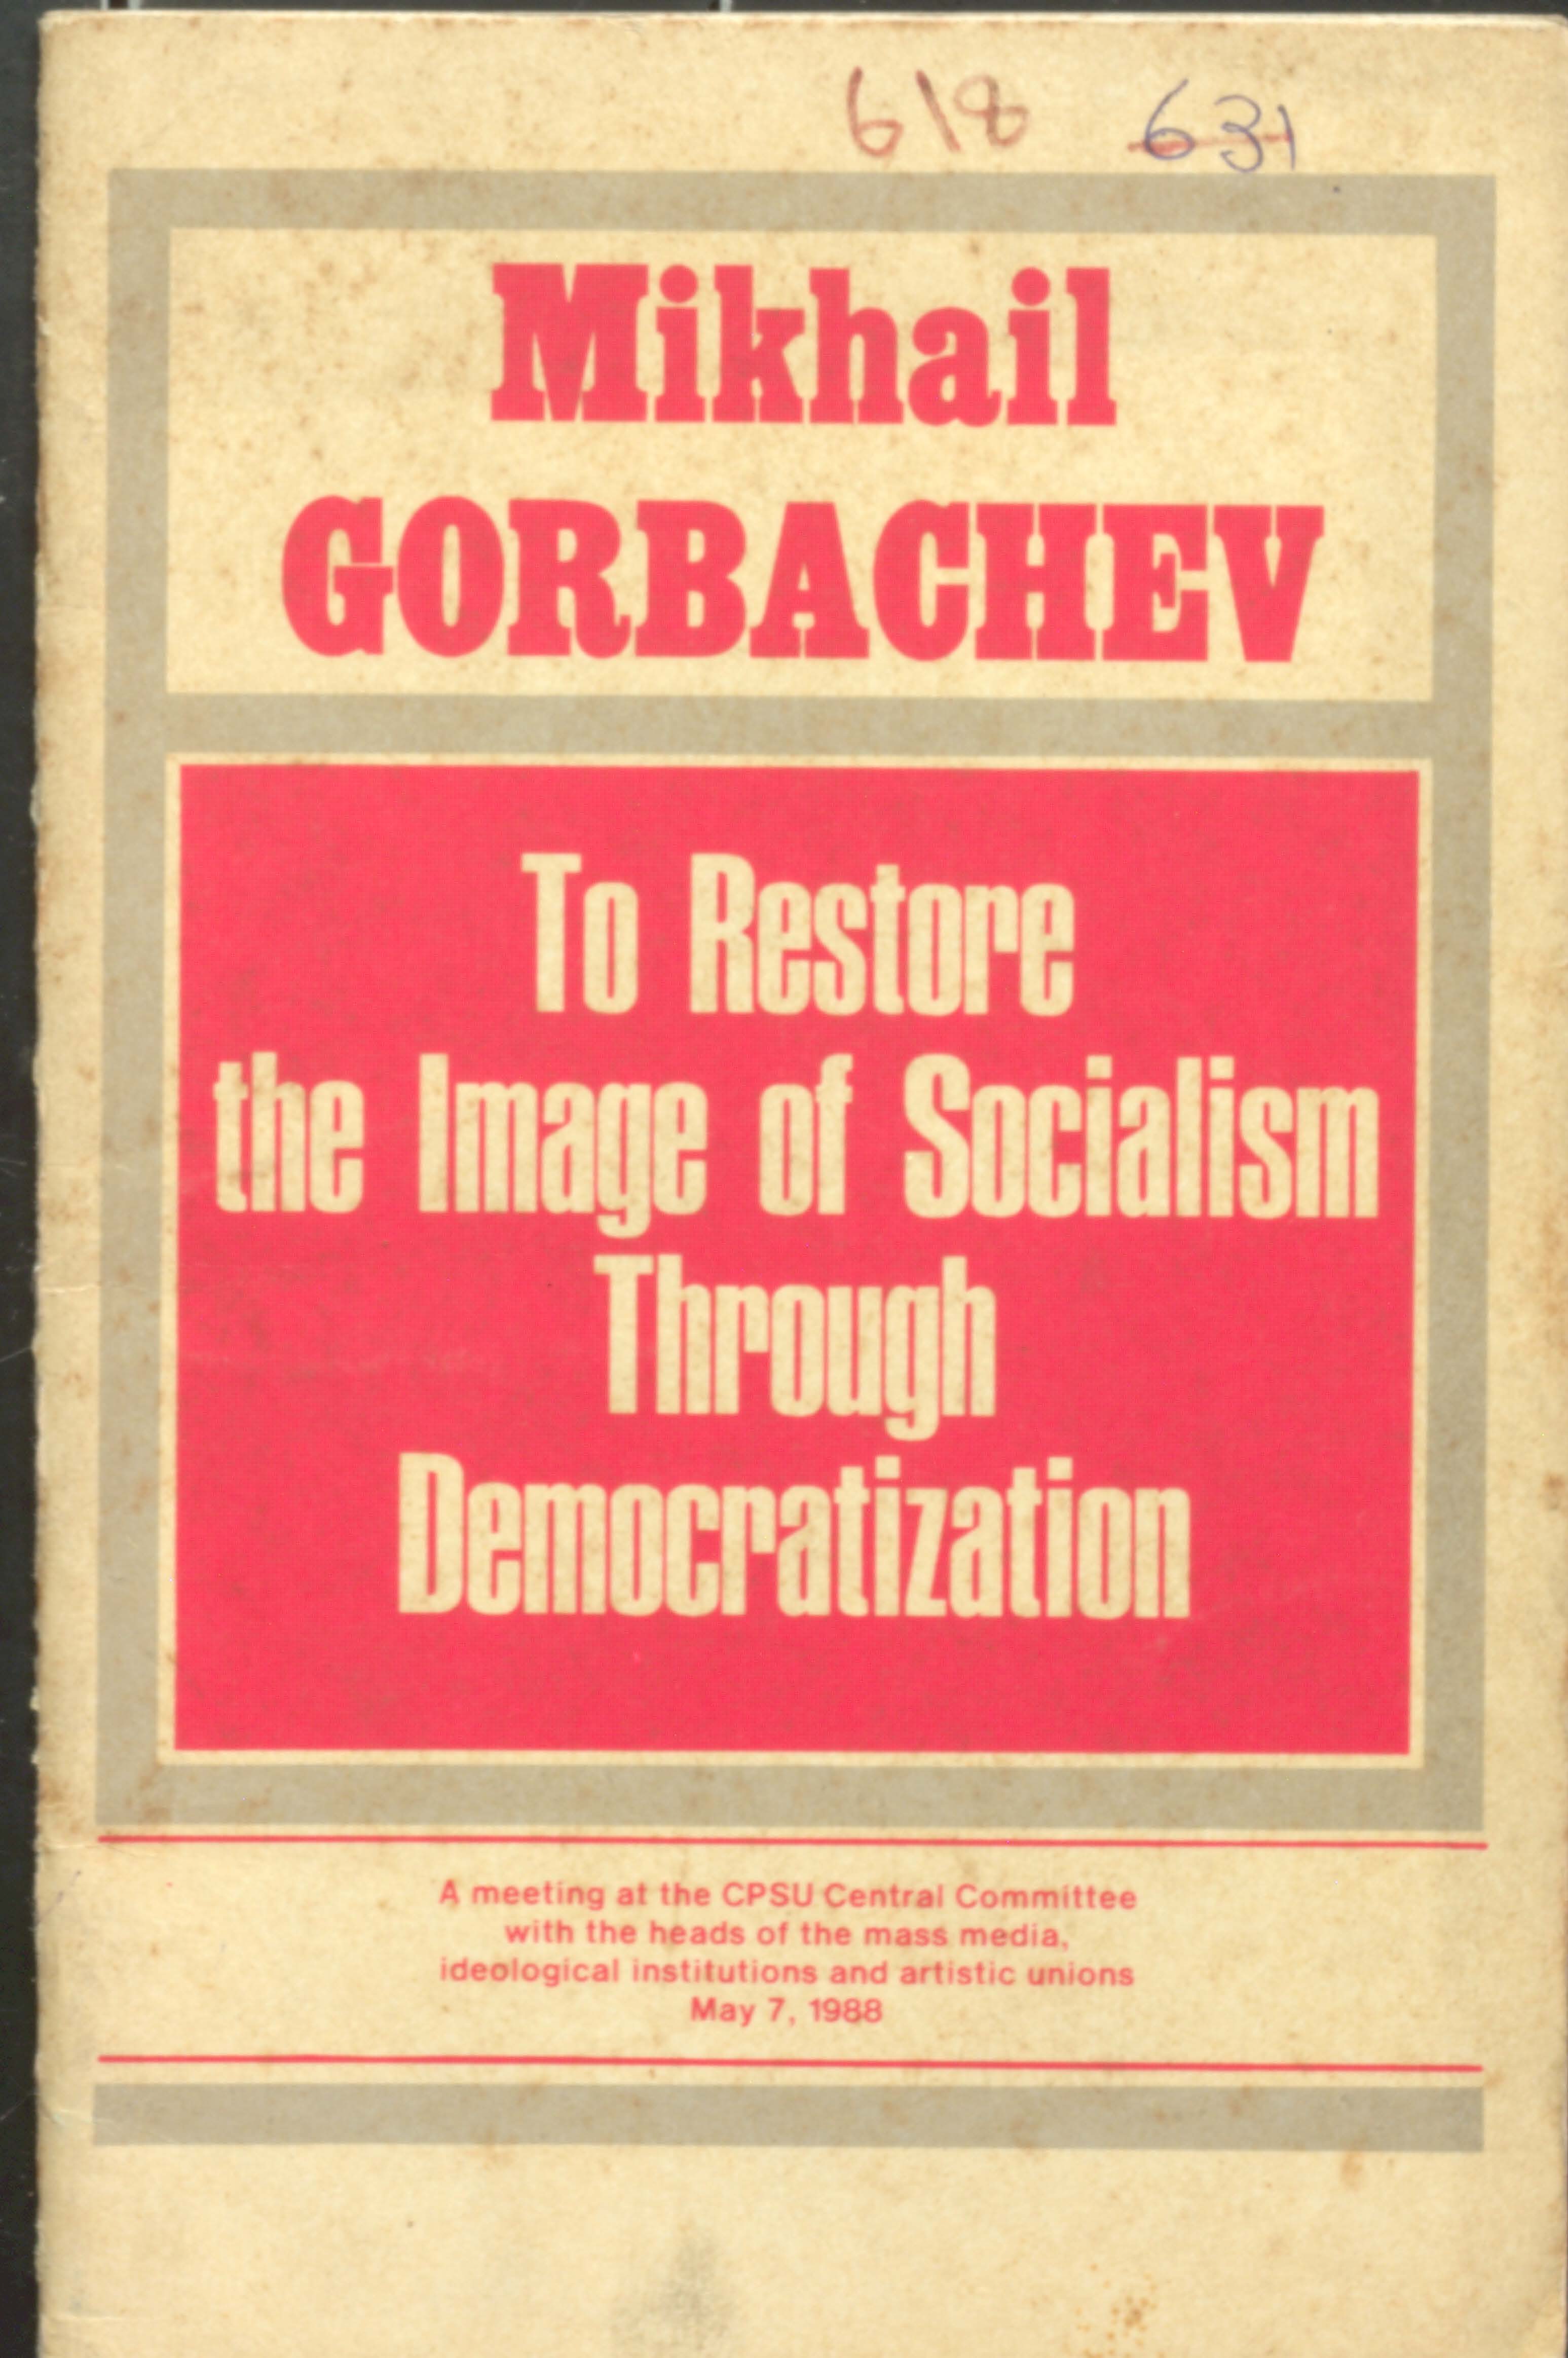 To Restore the Image of Socialism Through Democratization